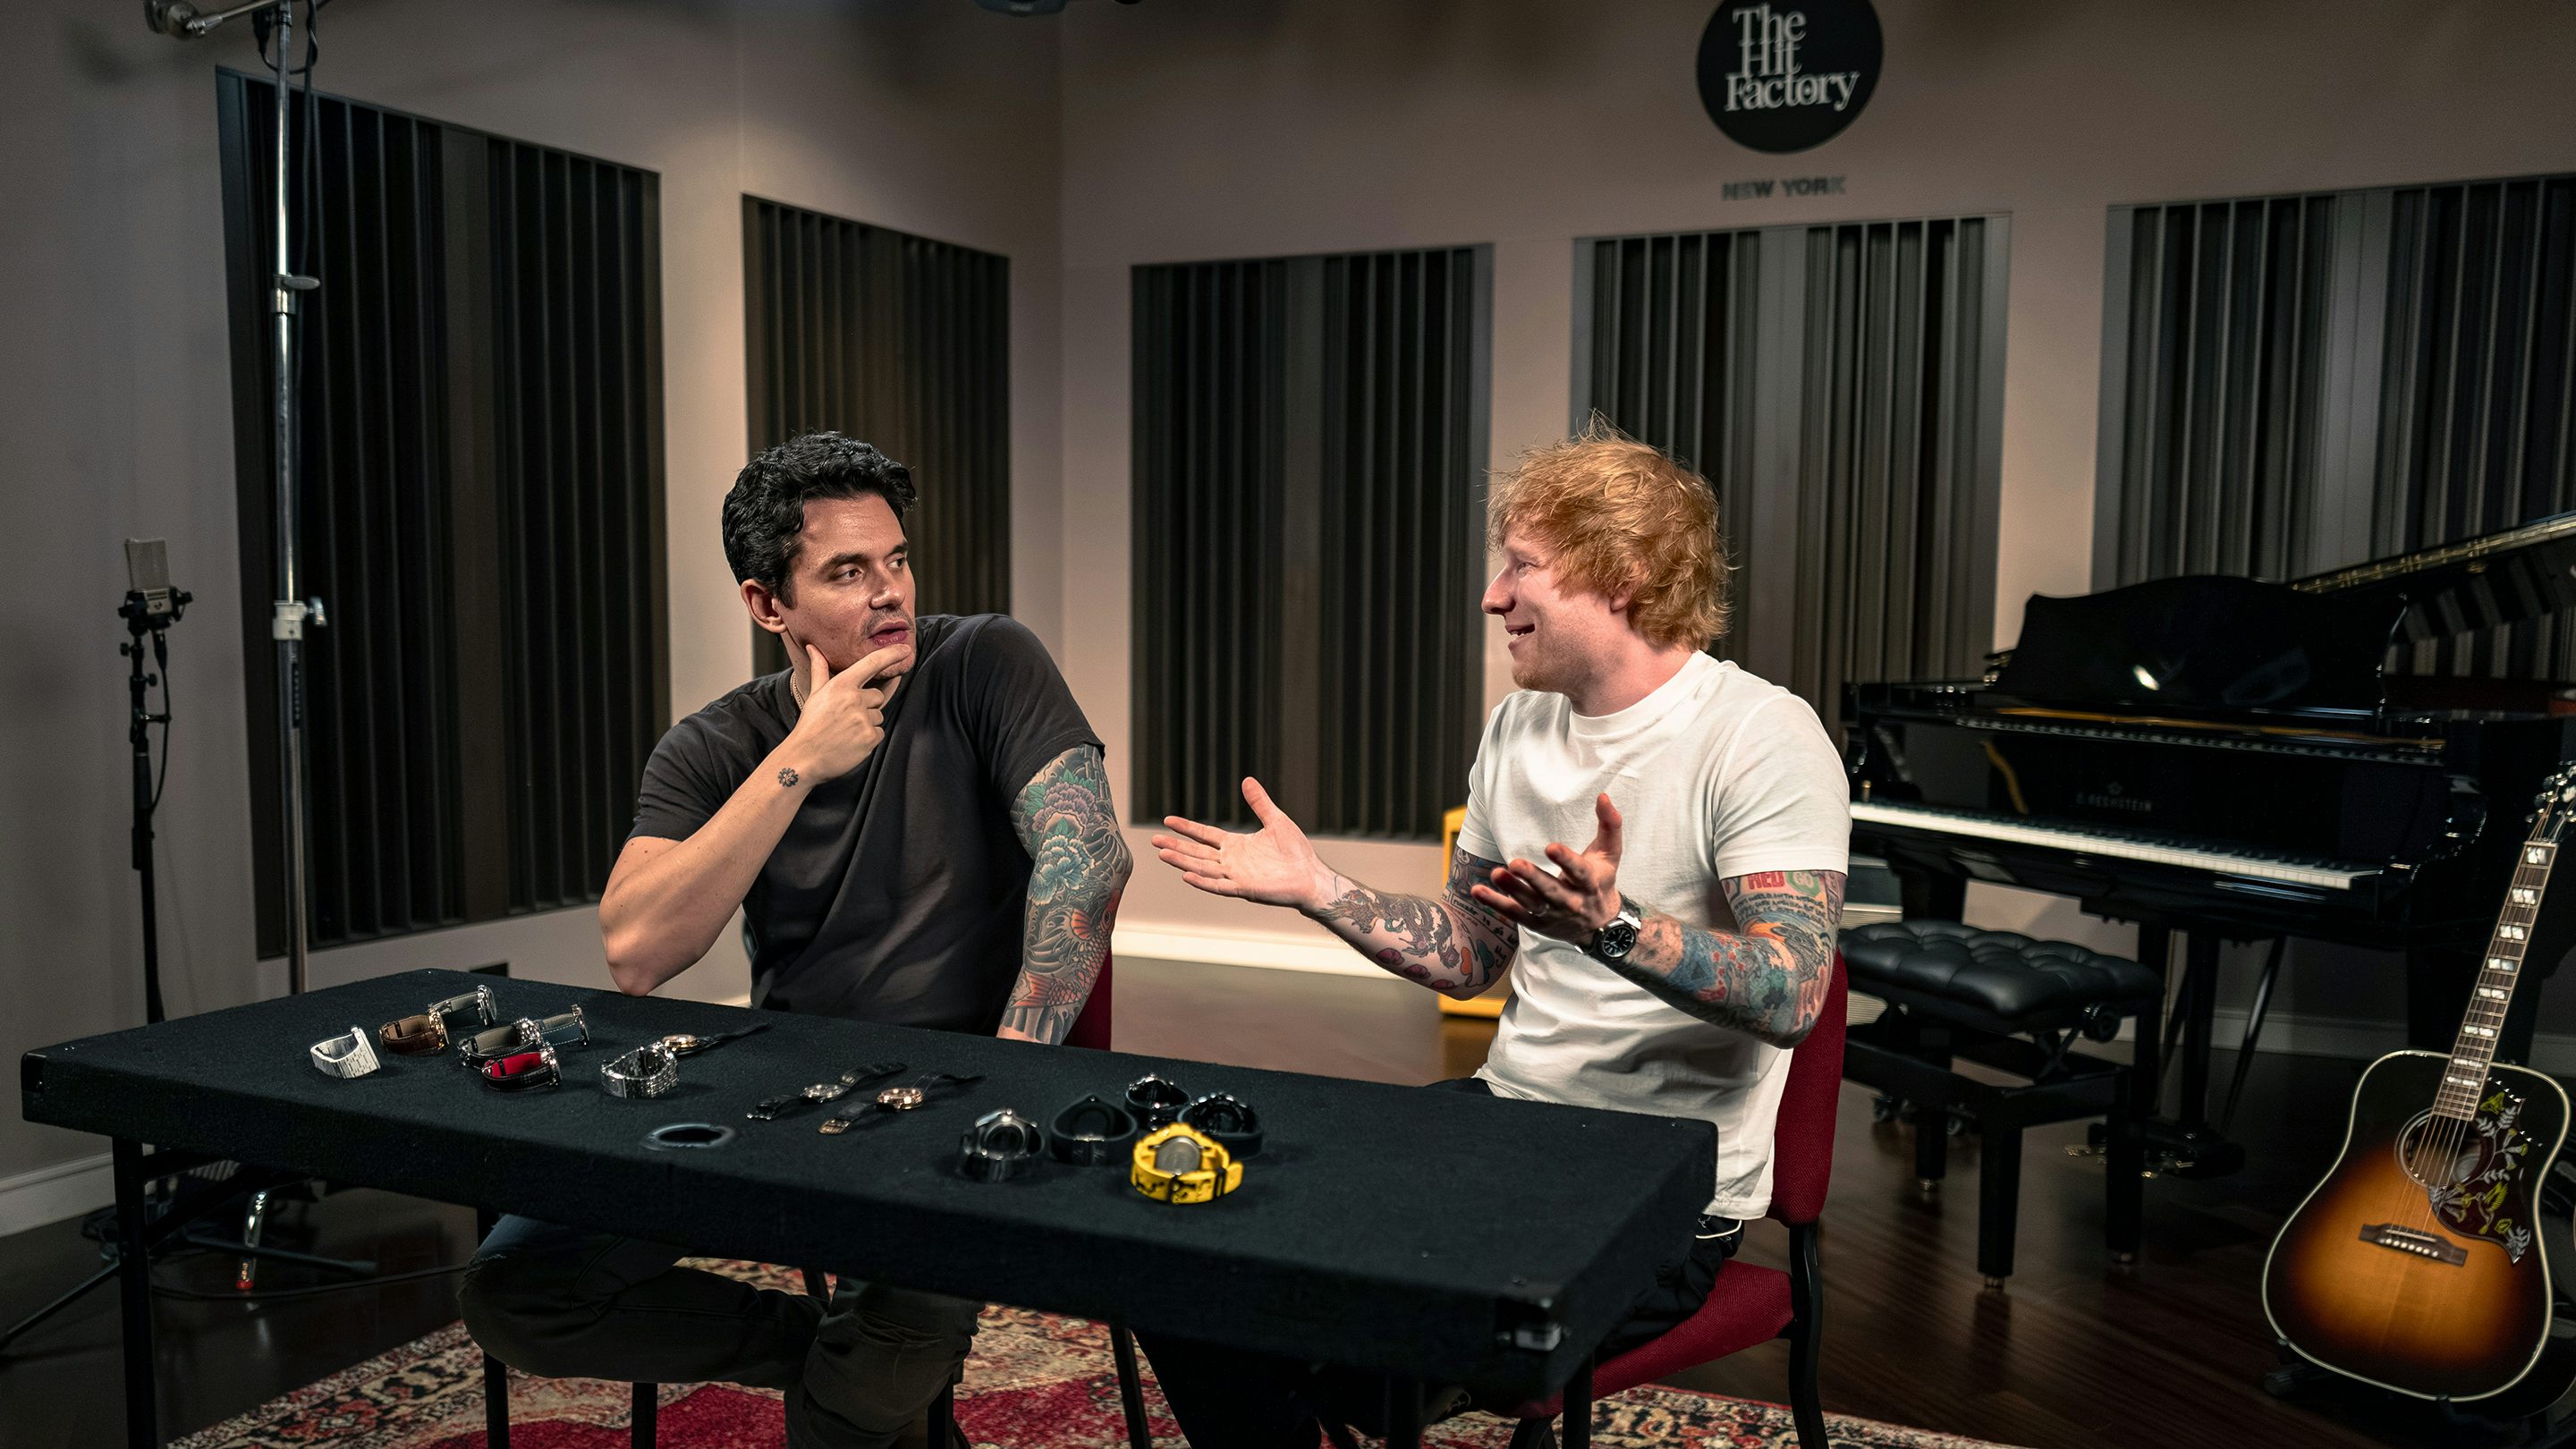 Ed Sheeran Talks With John Mayer About His Watch Collection